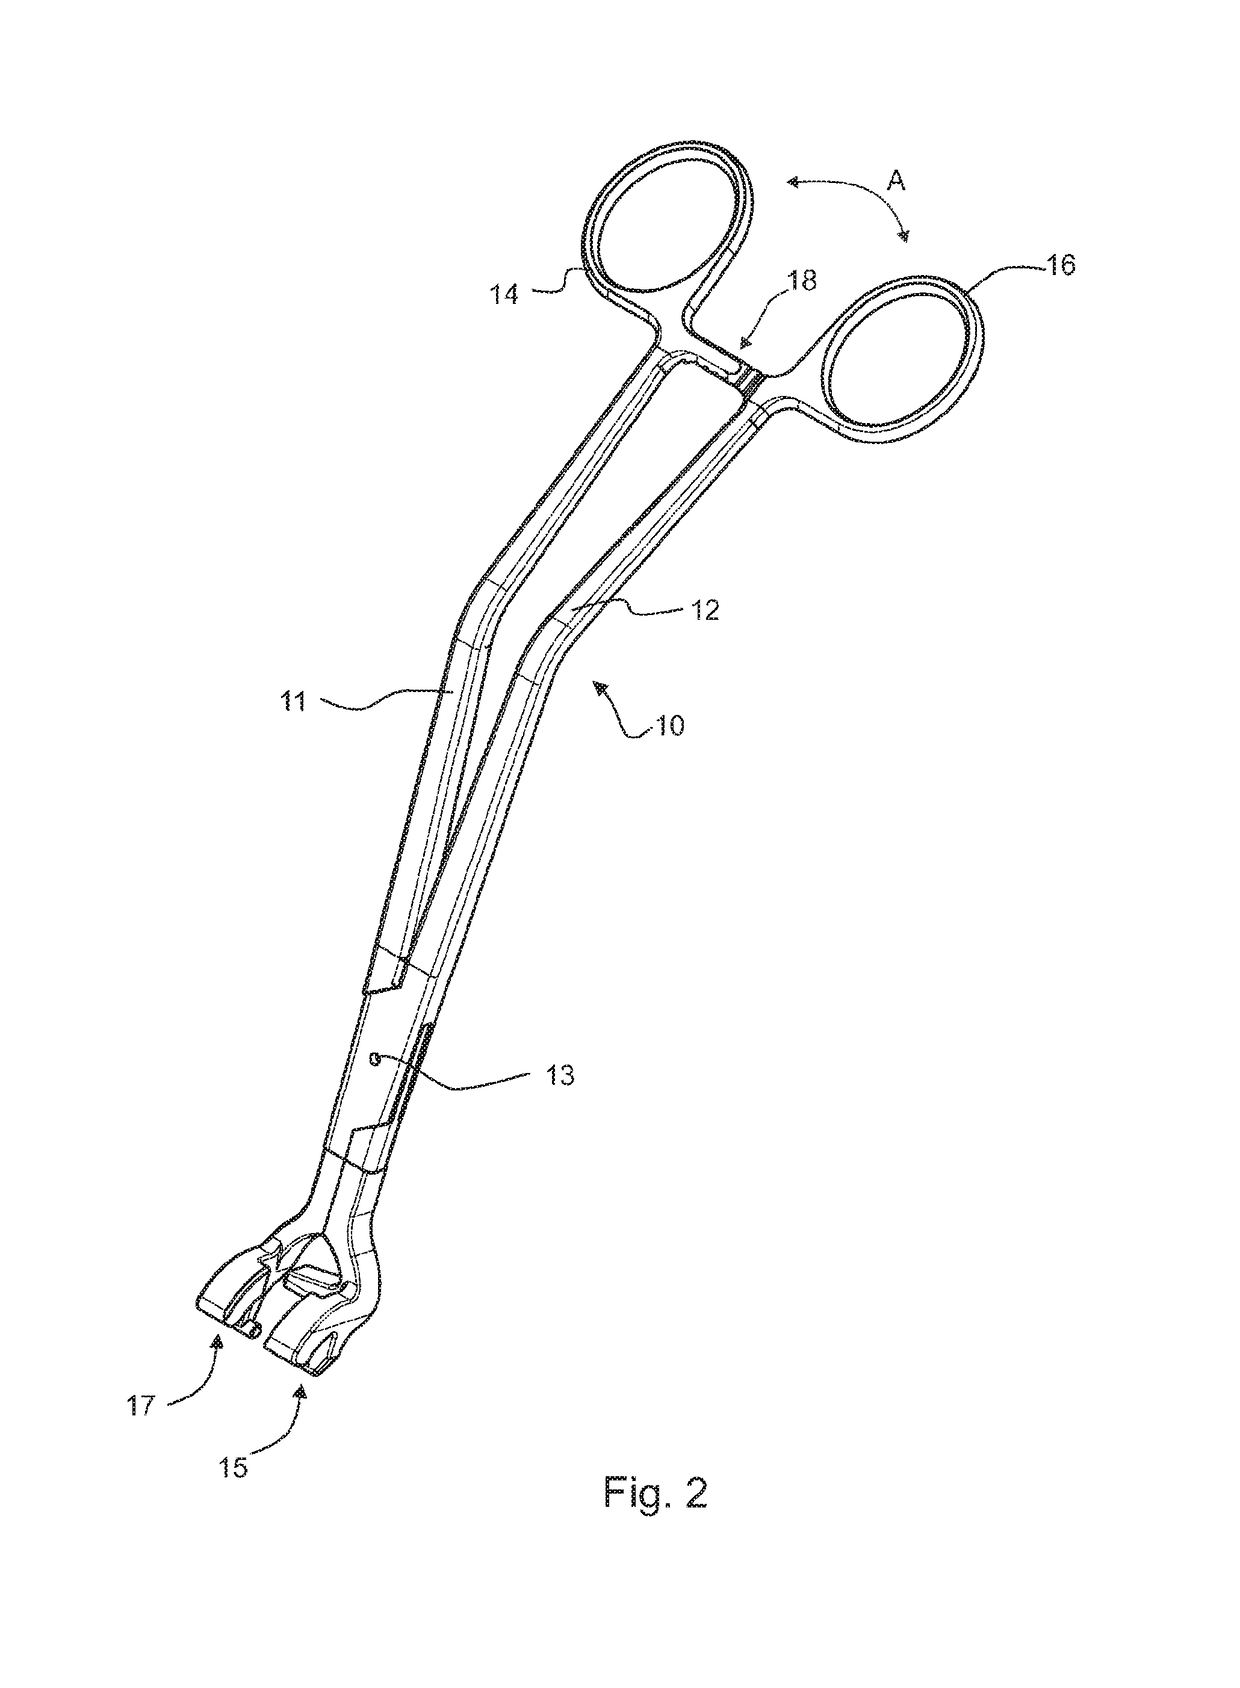 Surgical instrument for manipulating, positioning and fixing a surgical rod in relation to an implant